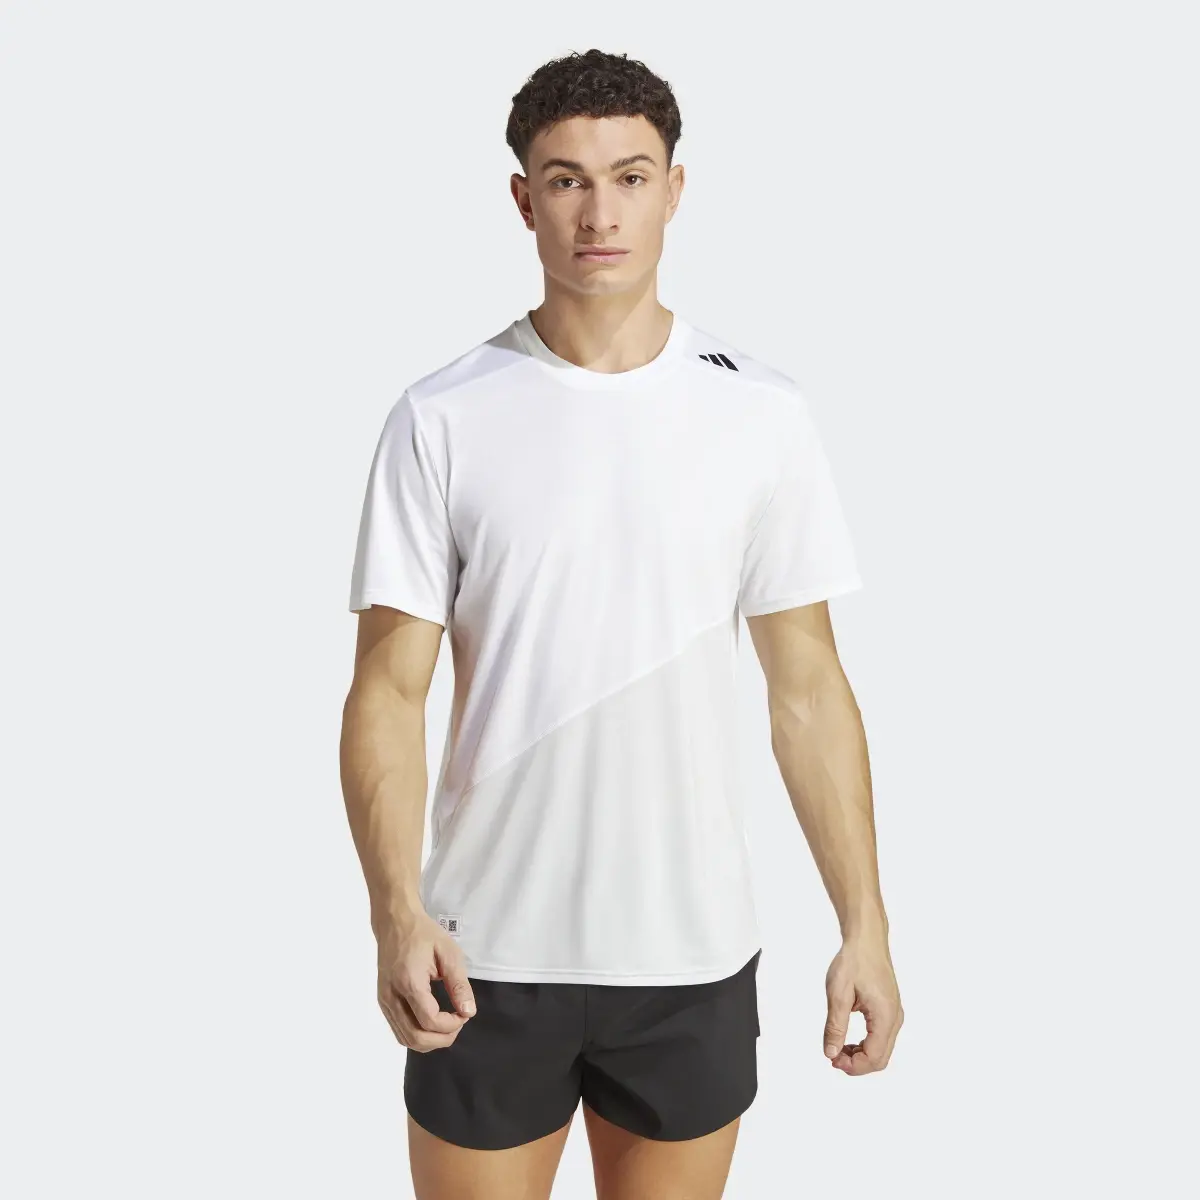 Adidas Made to be Remade Running T-Shirt. 2